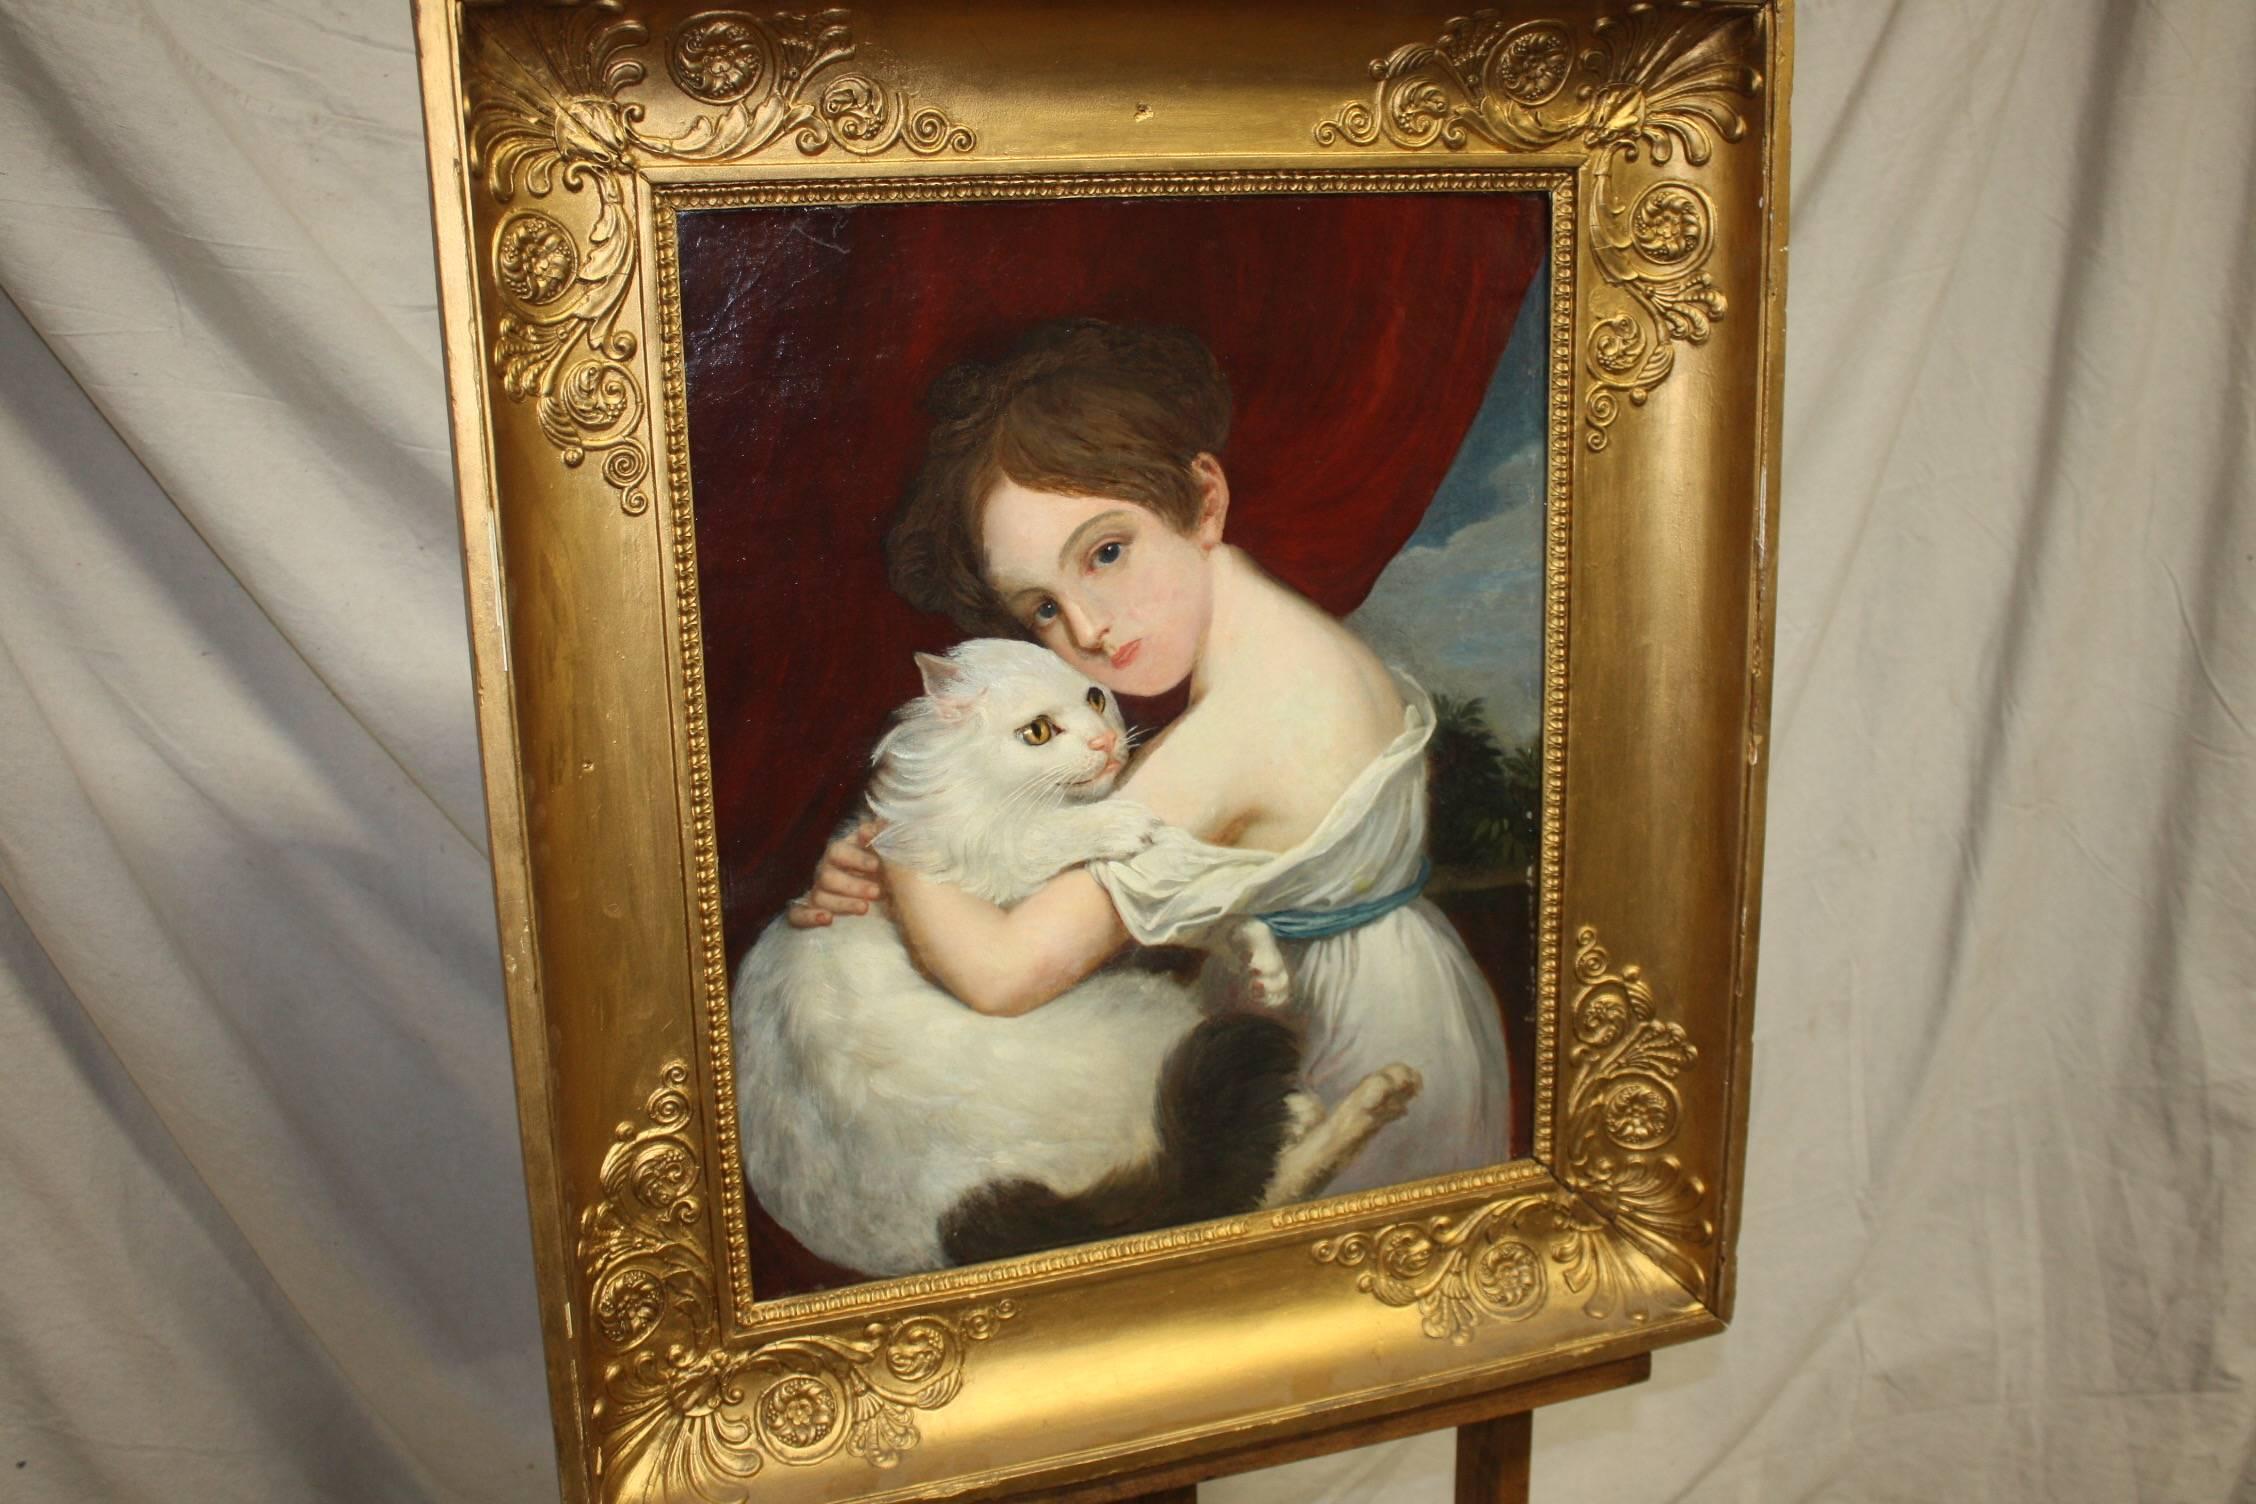 Beautiful early 19th century portrait dated and signed at the back.

Portrait attributed to Berthon, student of David 